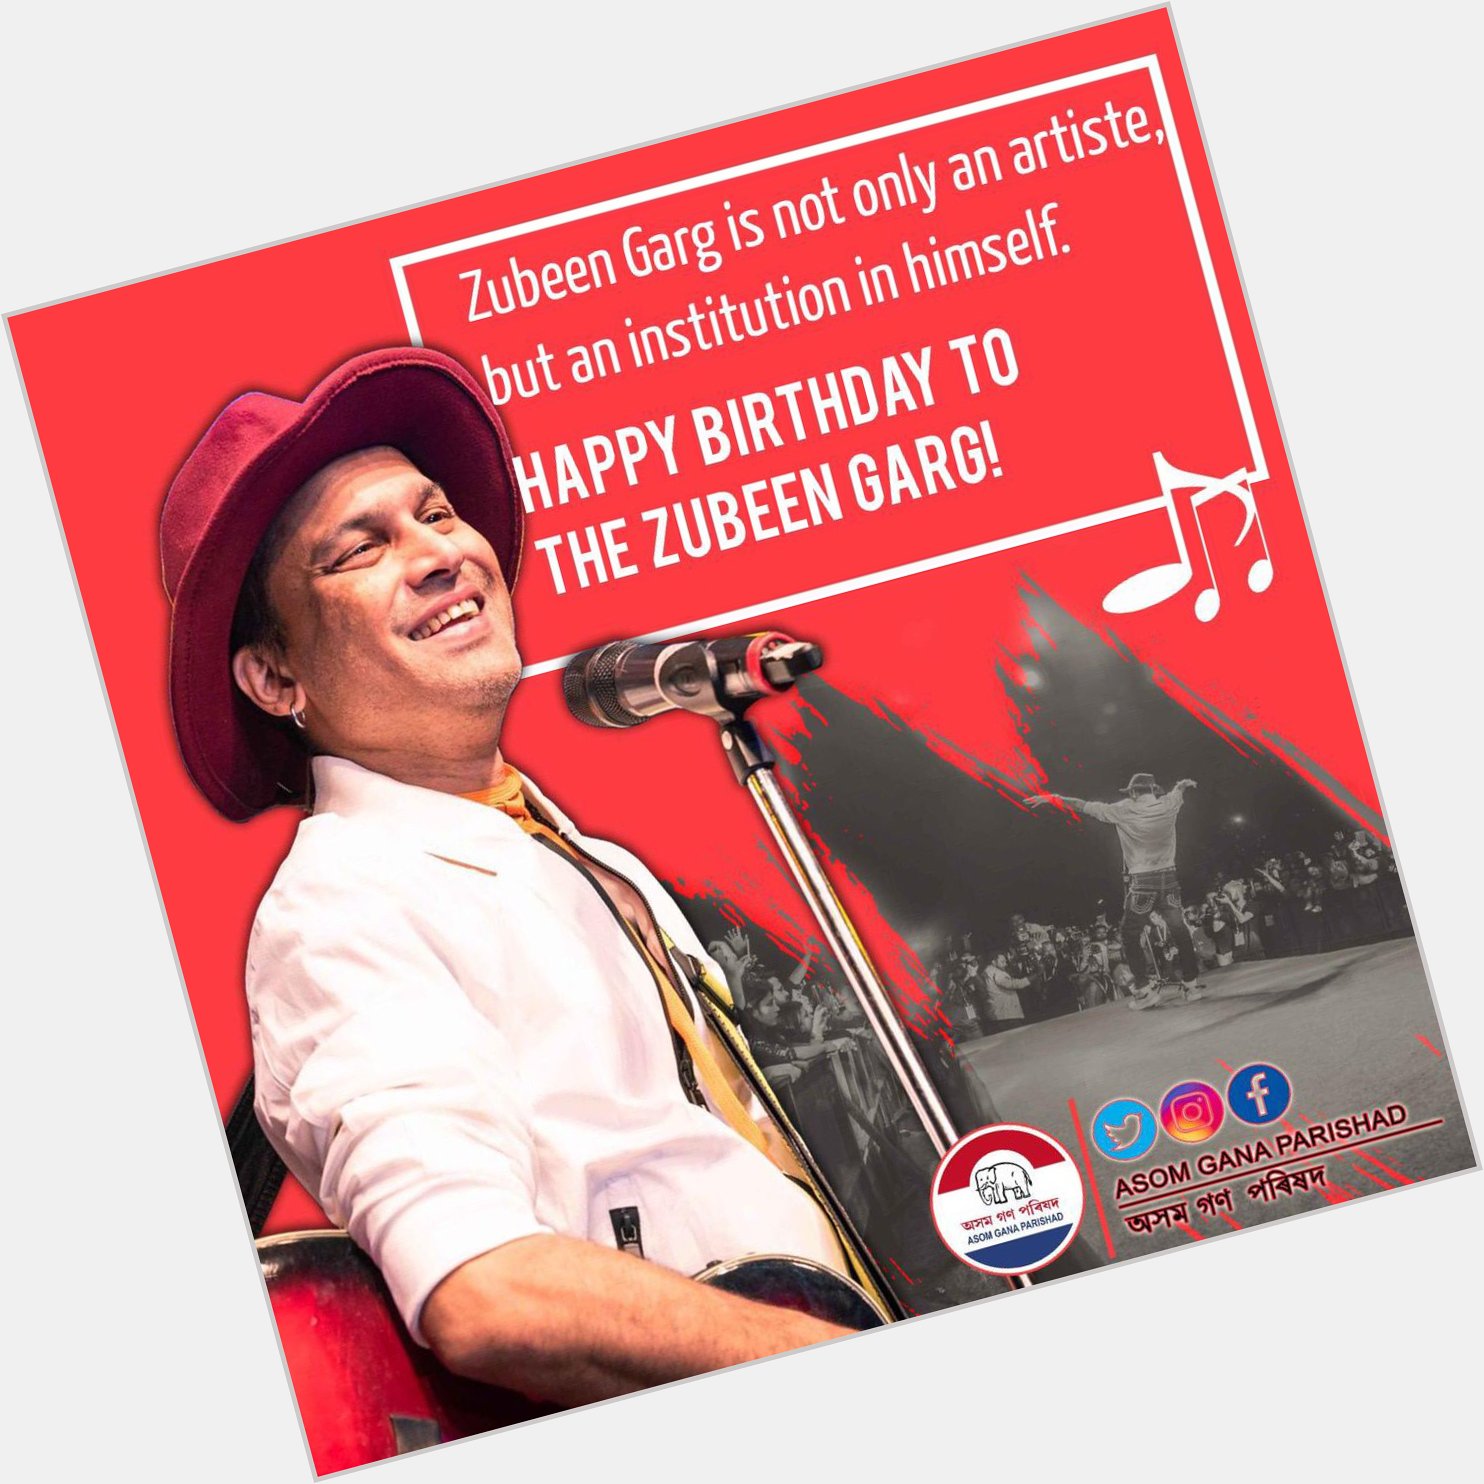 Zubeen Garg is not only an artiste, but an institution in himself.

Happy birthday to The Zubeen Garg! 